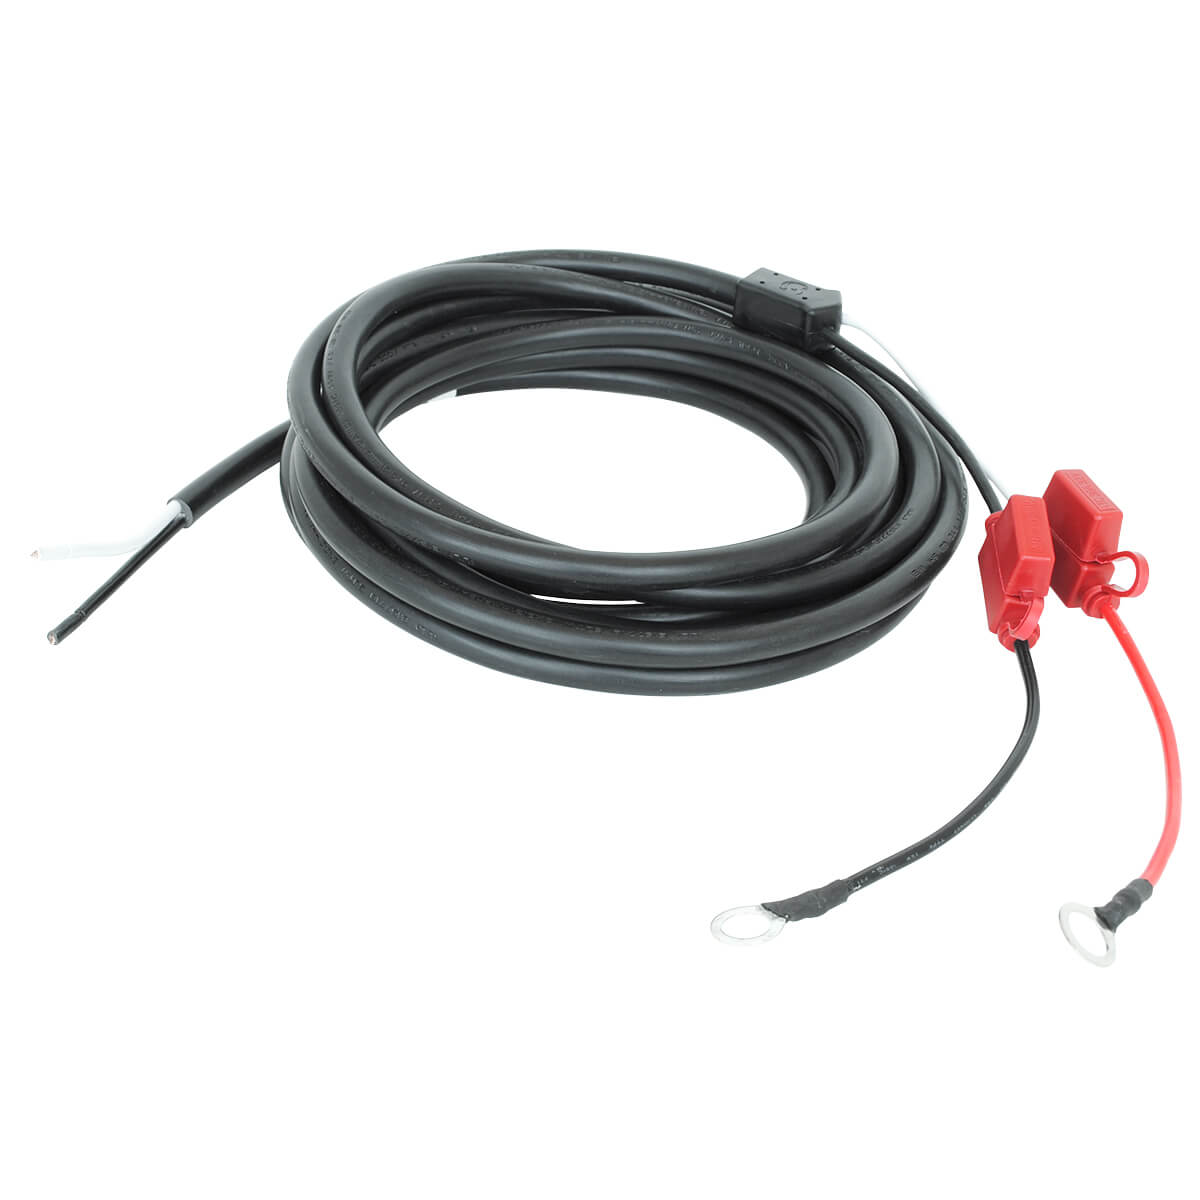 Minn Kota Battery Charger Extension Cable 15' 1820089